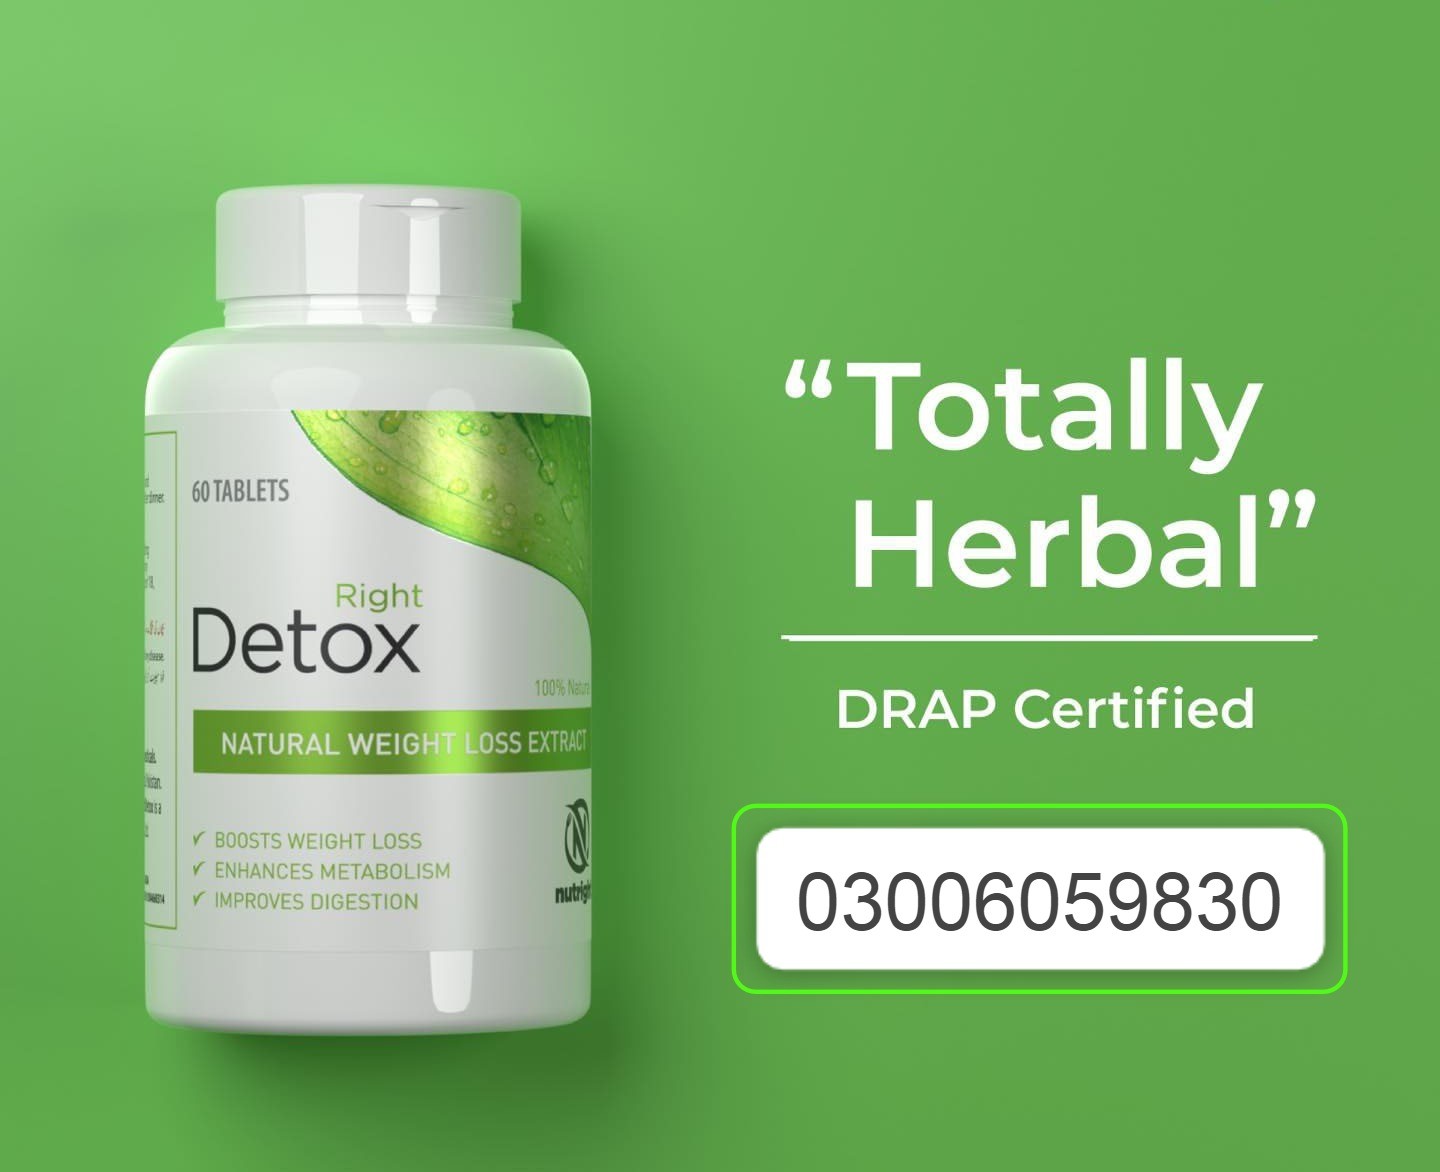 <p><strong>Right Detox-03006059830</strong></p>